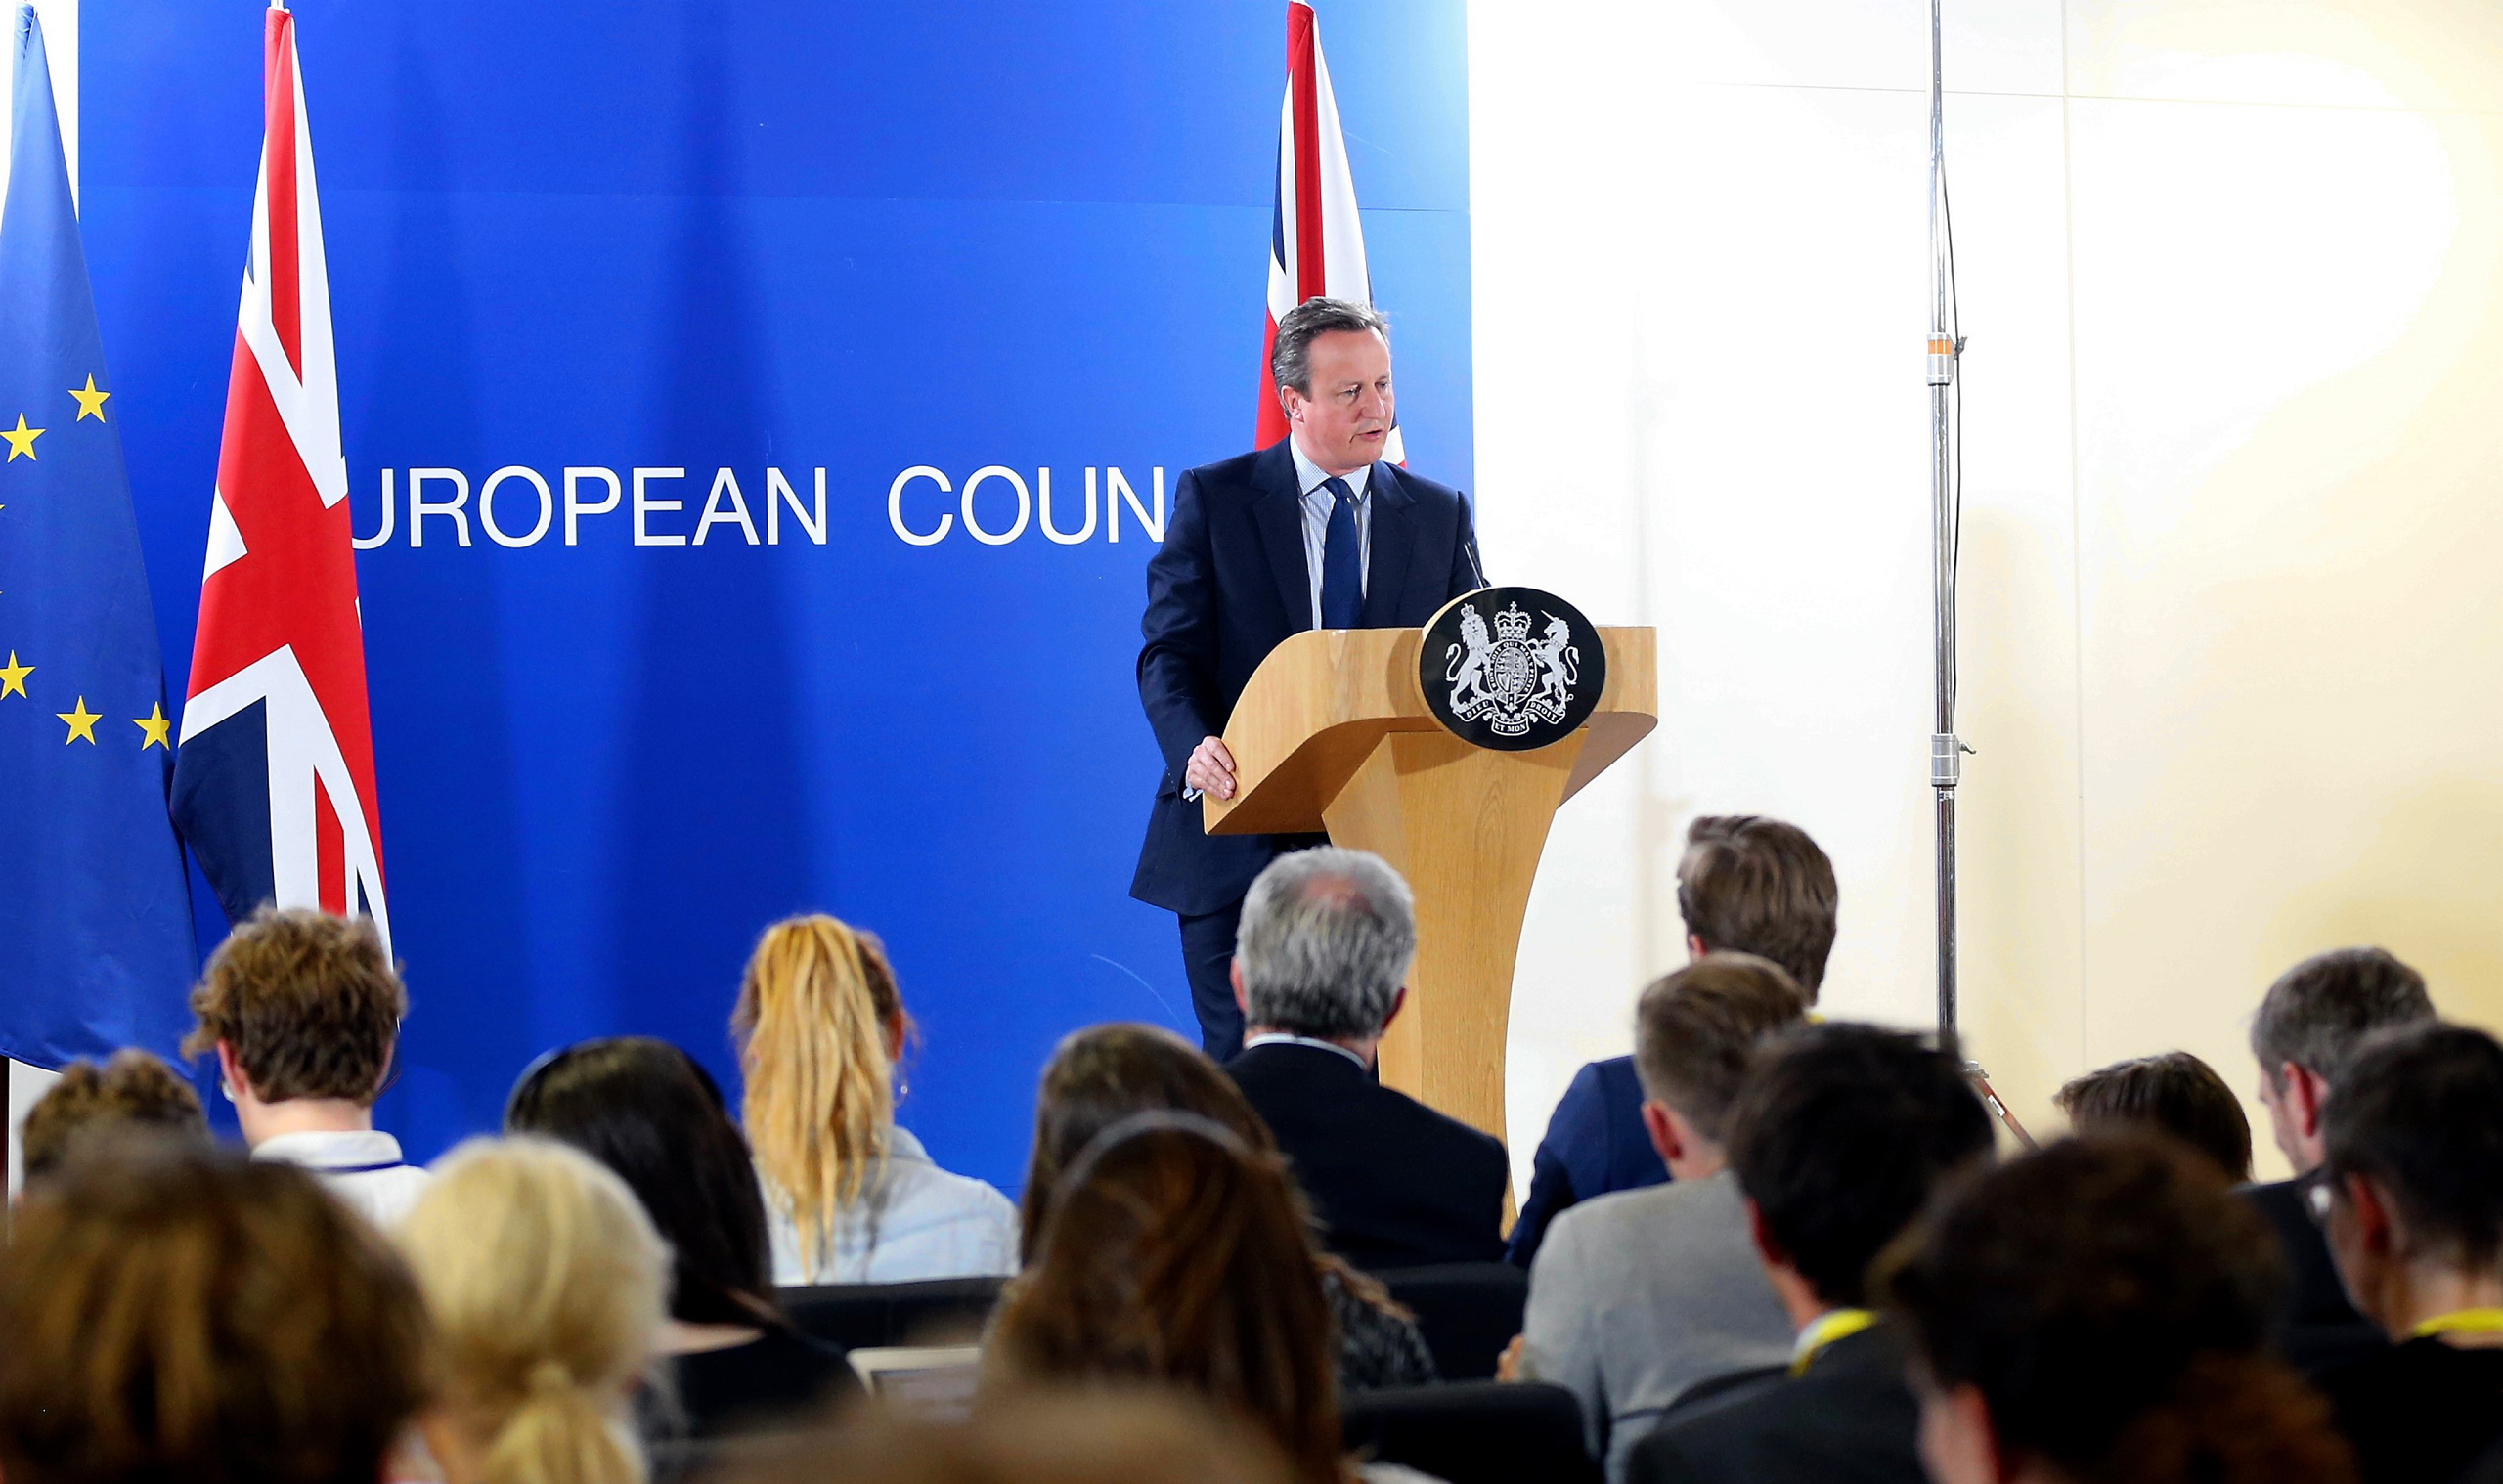 British Prime Minister David Cameron holds a press conference after  EU summit meeting in Brussels on June 28, 2016. (Anadolu Agency/Getty Images)